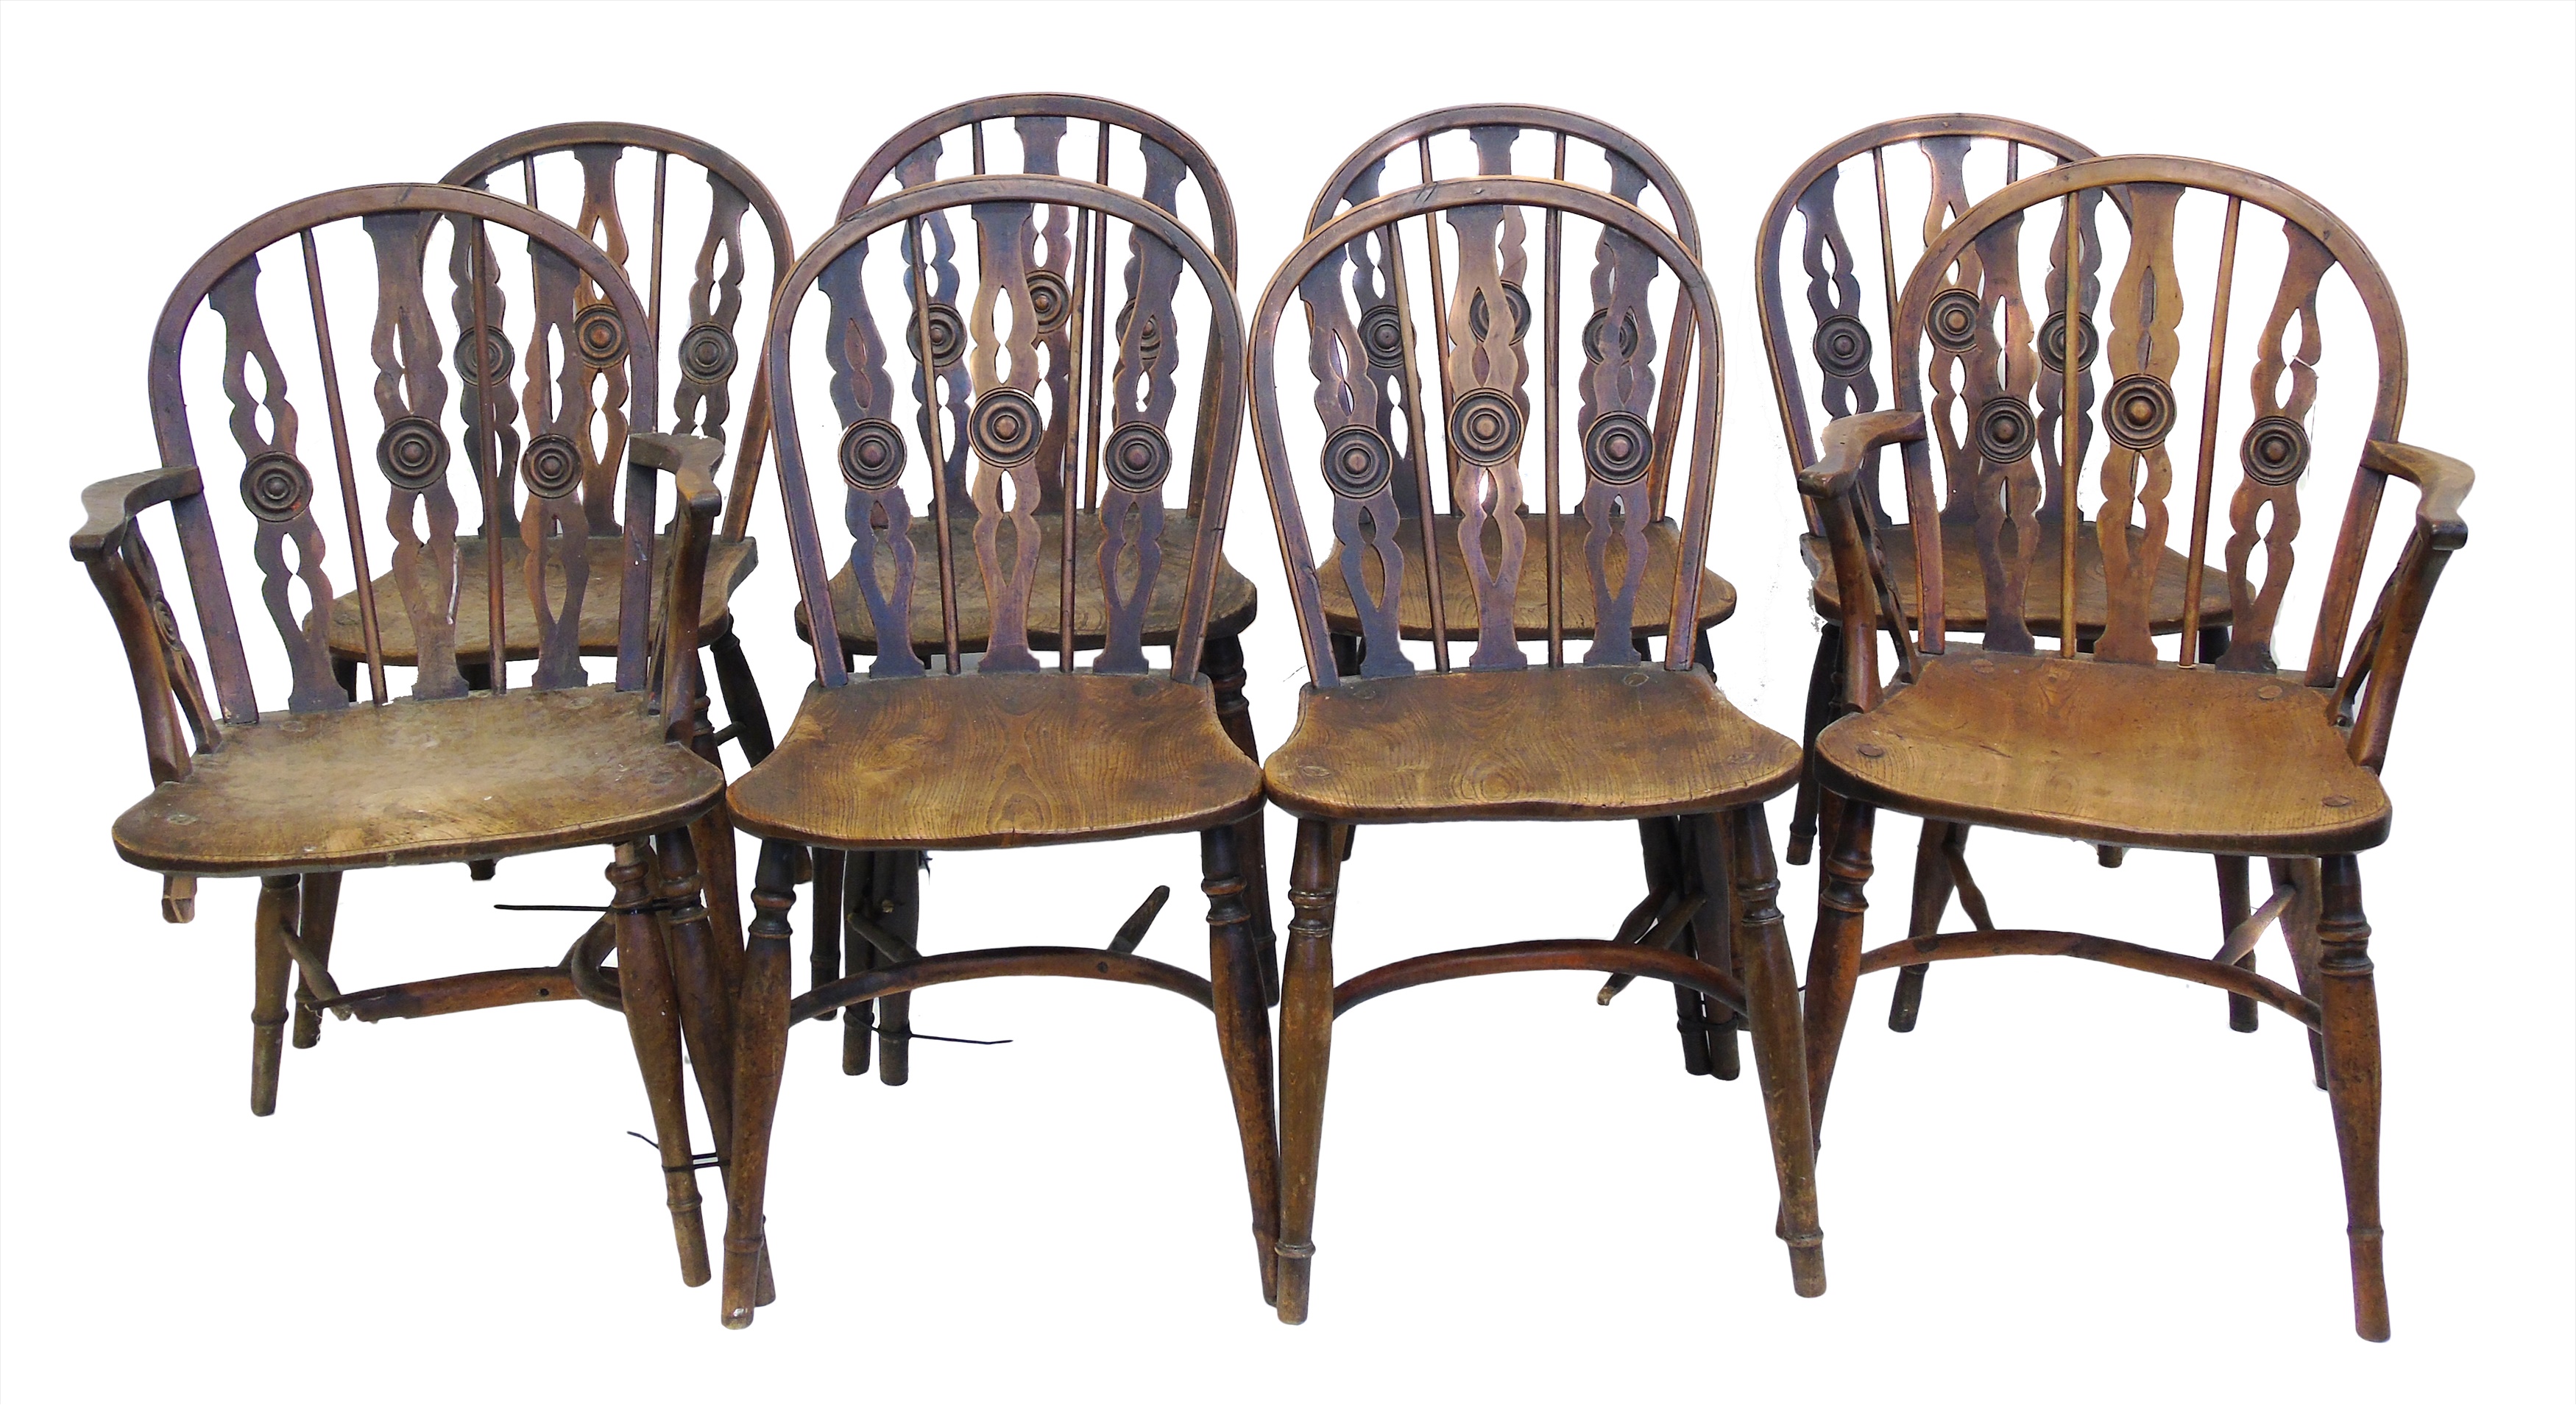 Eight 19th century Windsor chairs by Prior, comprising six single and two open arm carvers, each chair with typical three-splat back with bullseye turnings to centre of each, yew frame, ash saddle seat with scribed edge, crinoline stretchers.